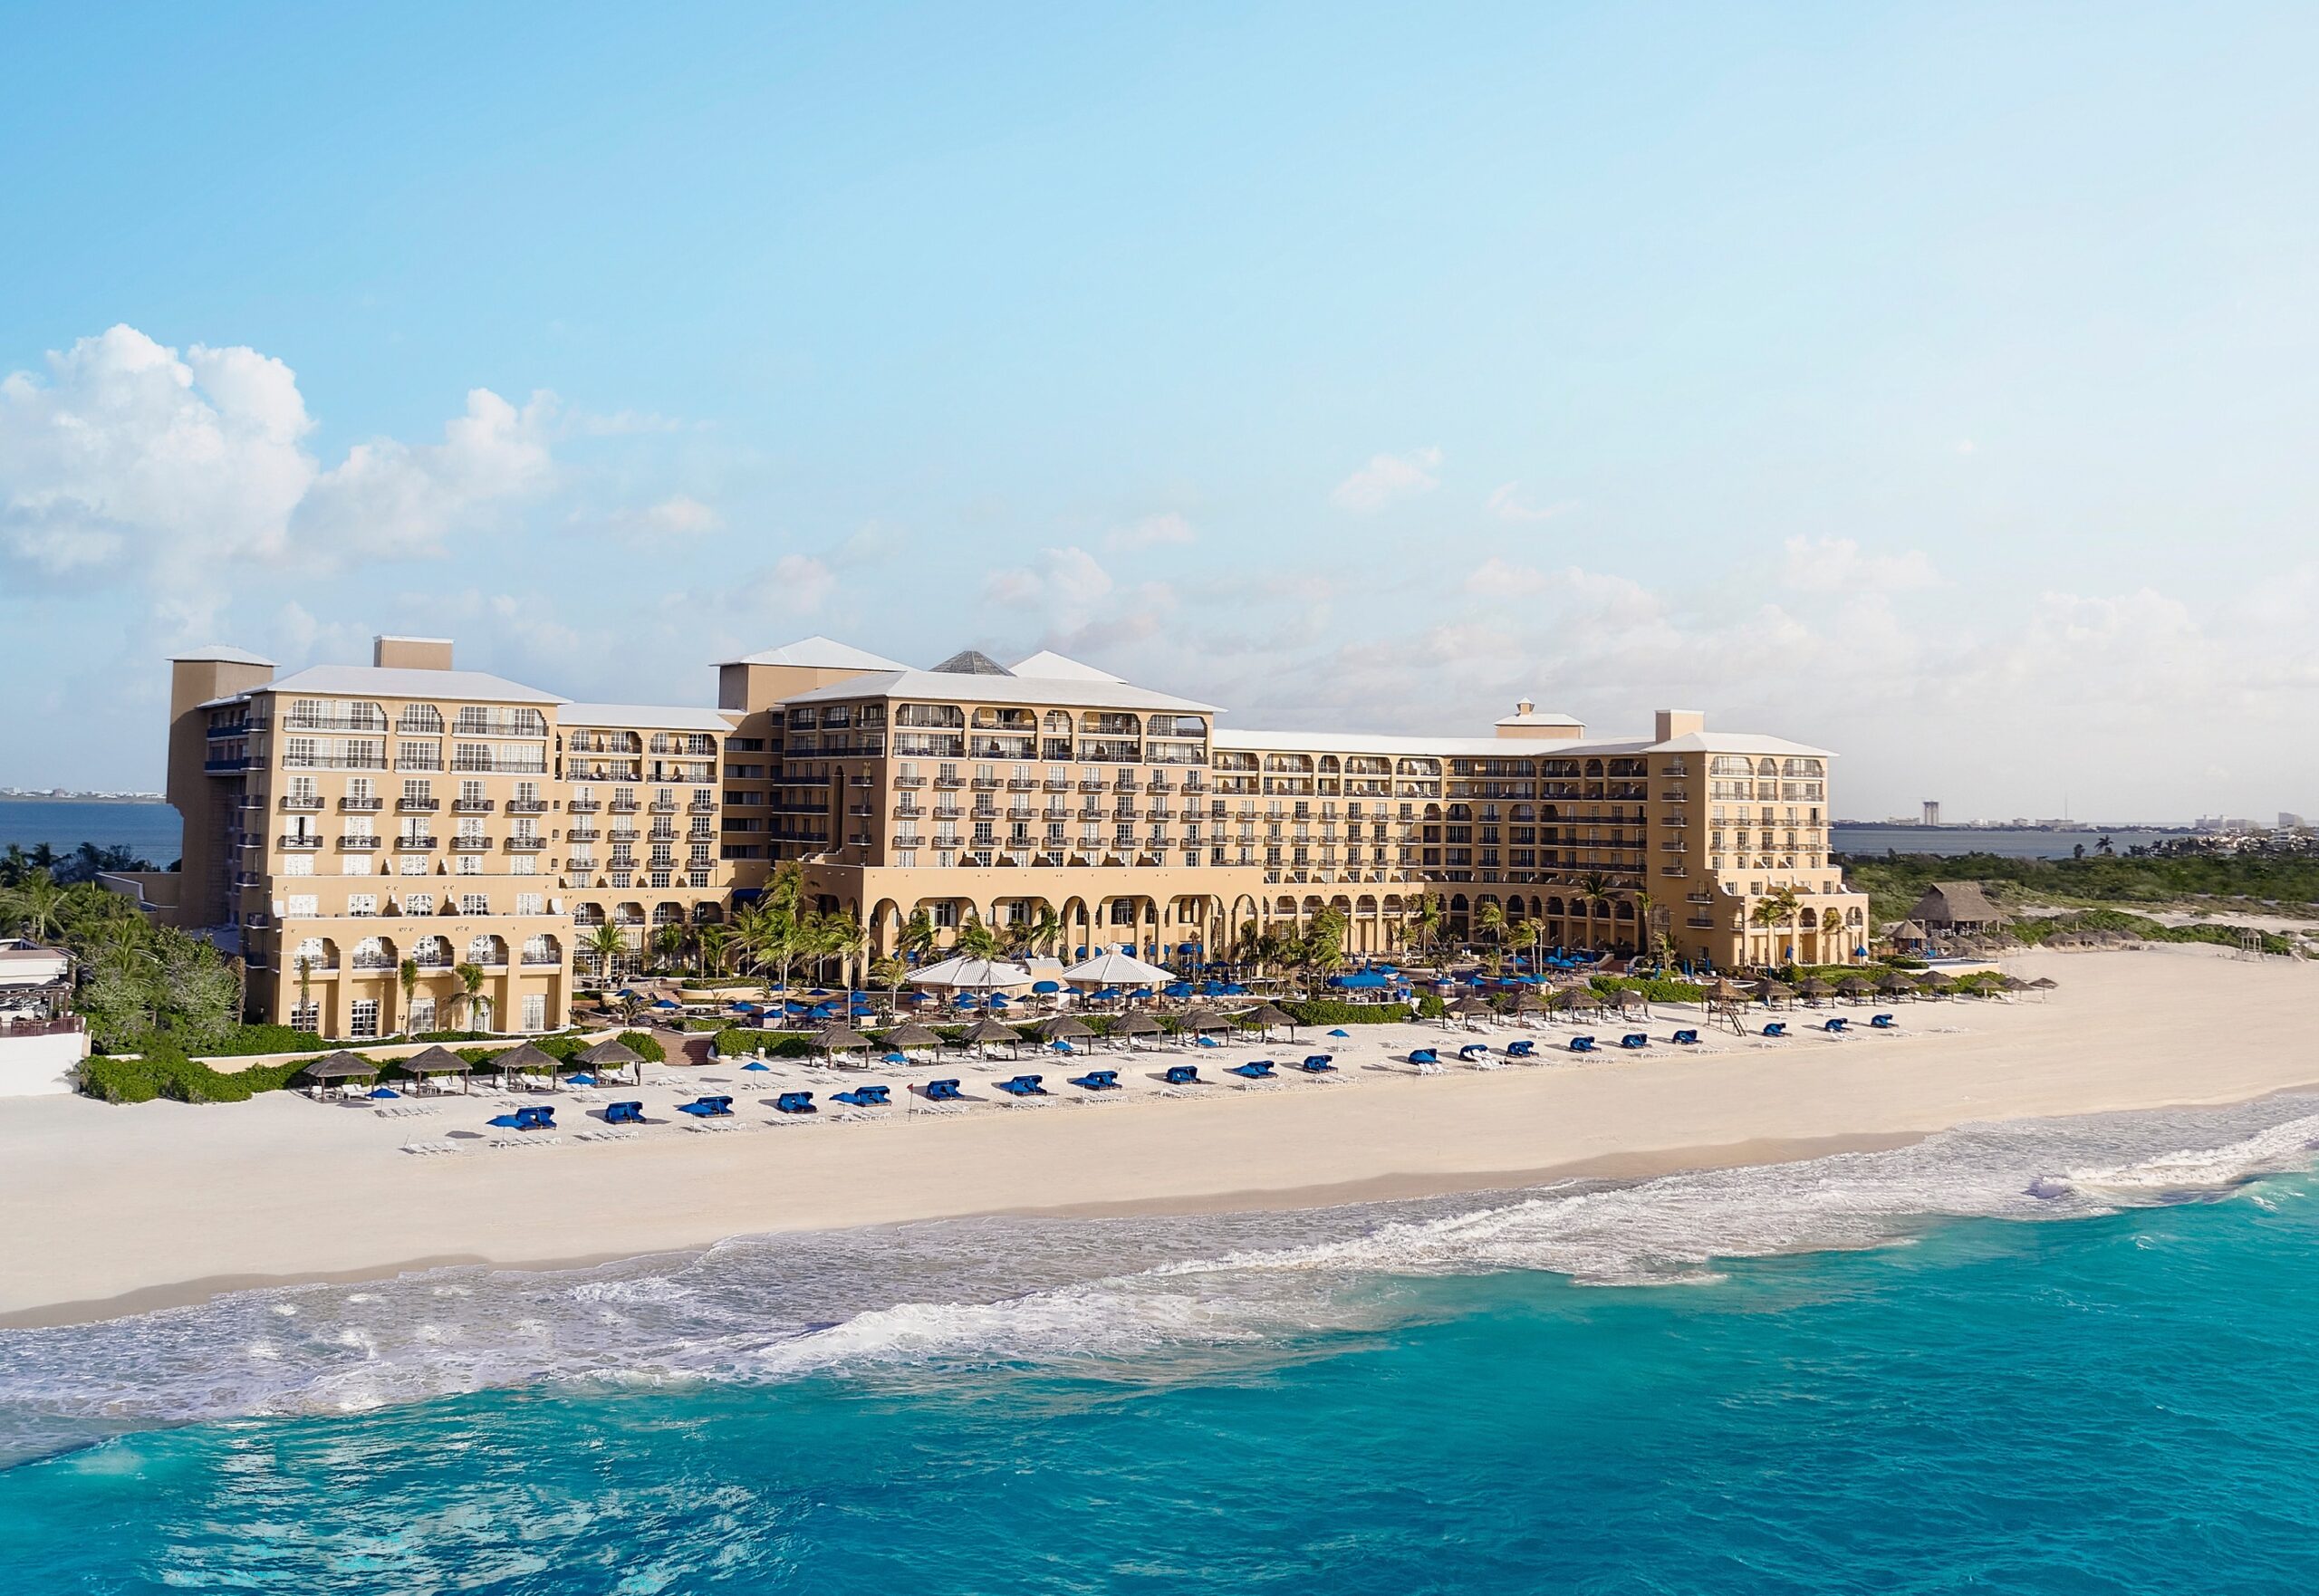 Kempinski Hotels Extends its footprint in North American Market through Takeover of Beach Hotel in Cancun, Mexico